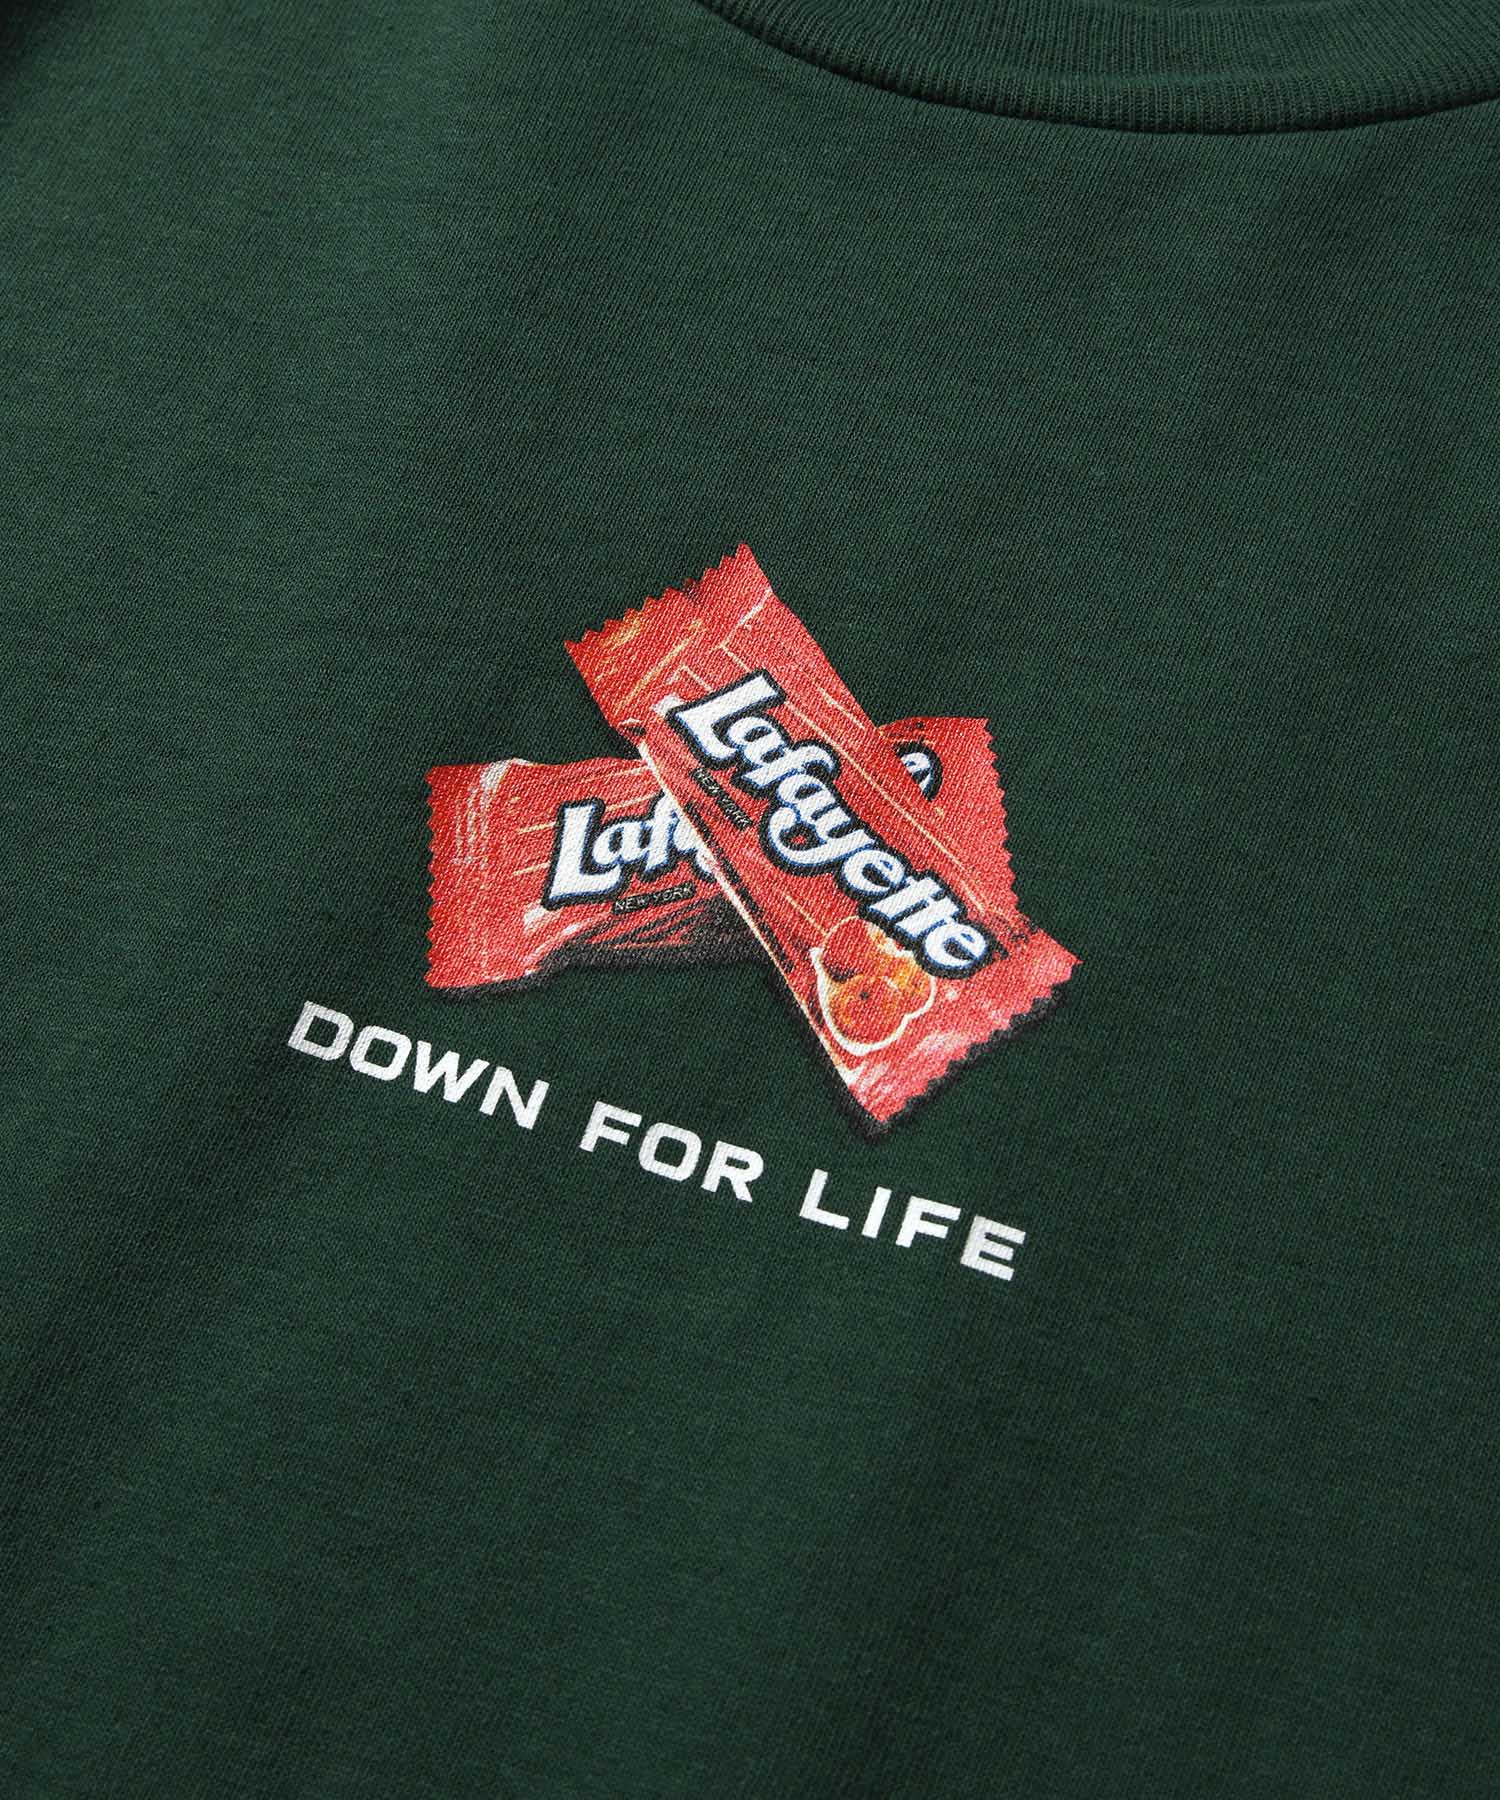 DOWN FOR LIFE TEE LS220106 DARK GREEN